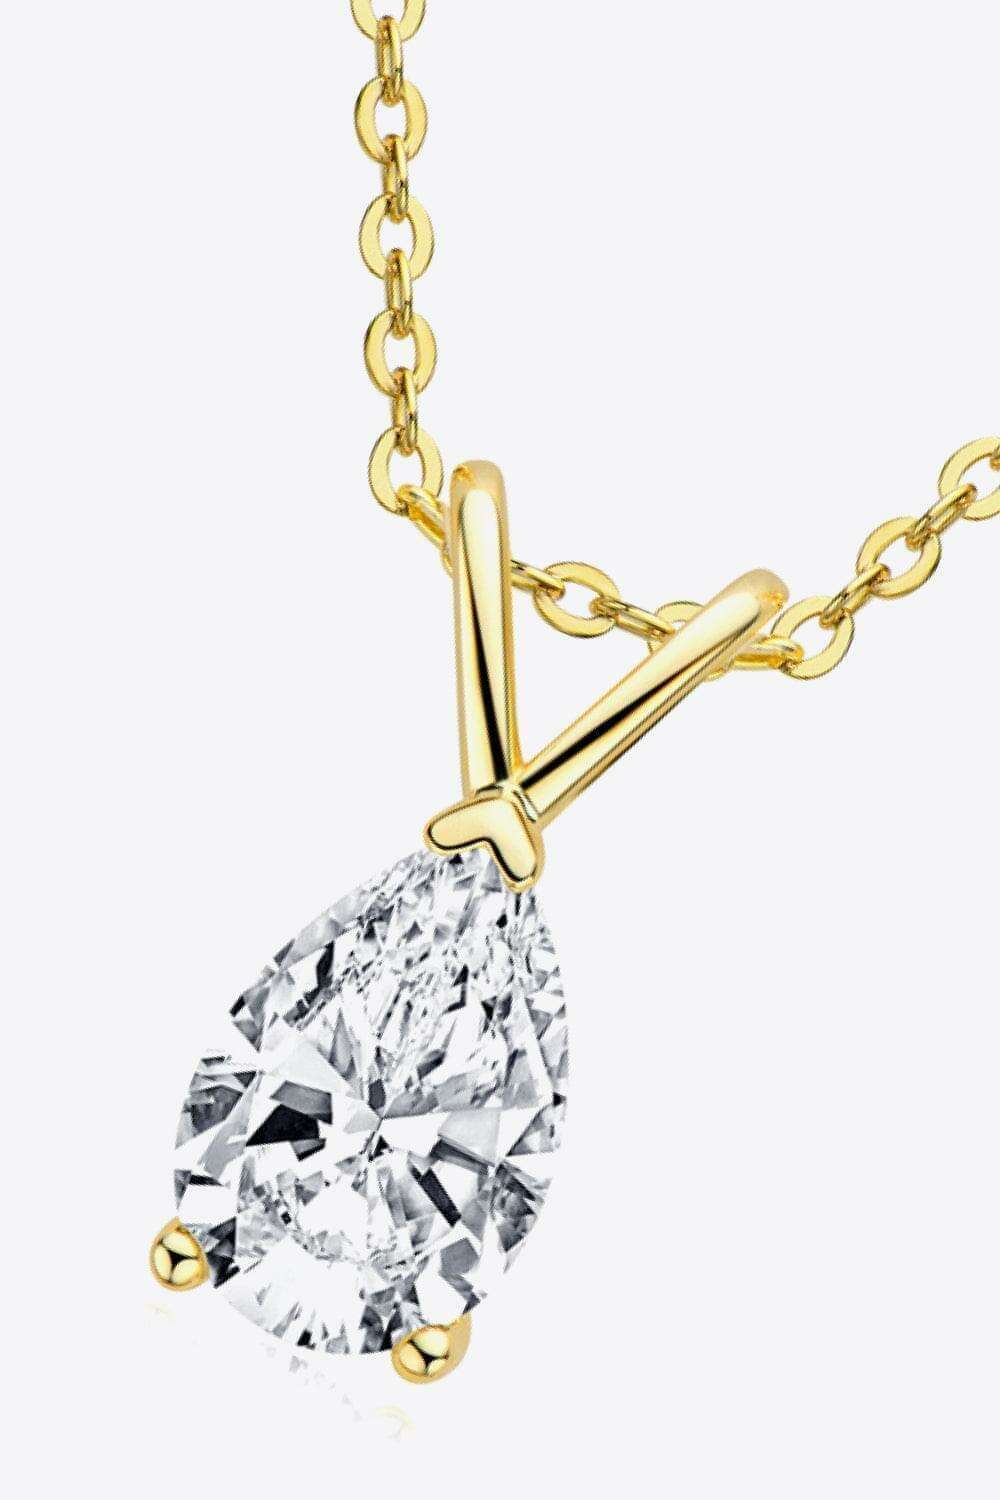 1.5 Carat Moissanite Pendant 925 Sterling Silver Necklace - gold or silver - necklace at TFC&H Co.